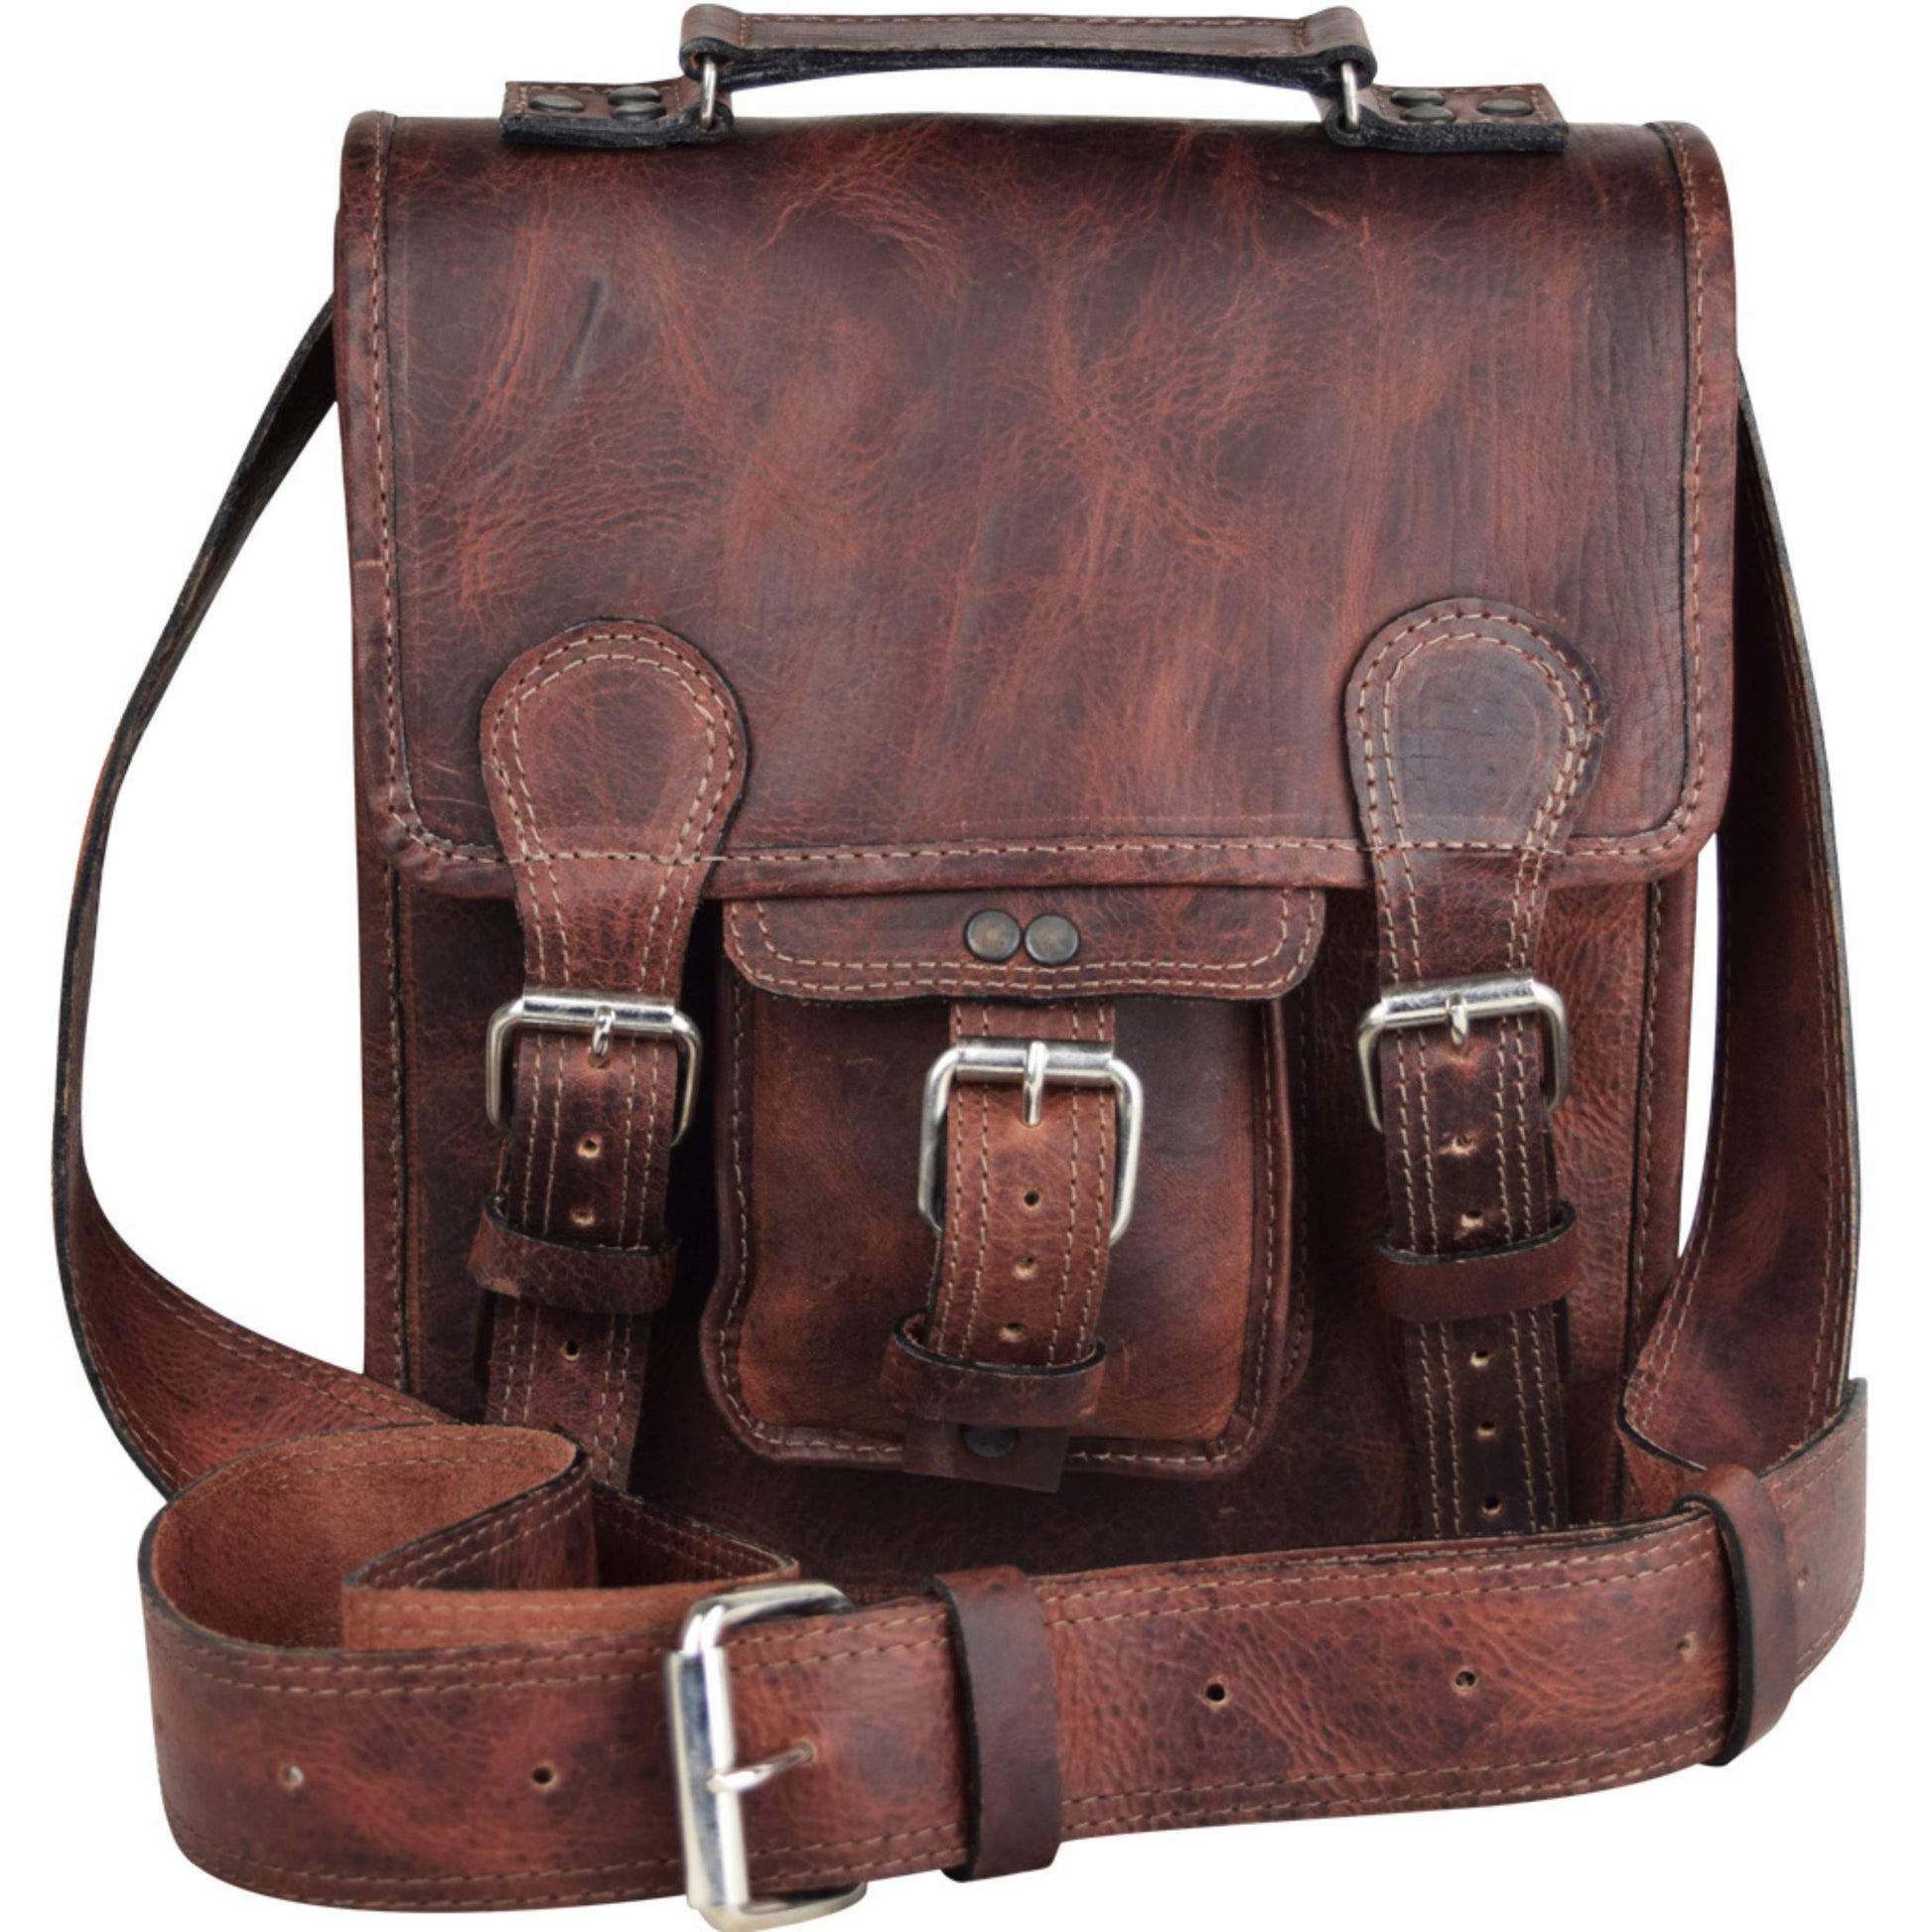 Unique Small Brown Leather Messenger Bag